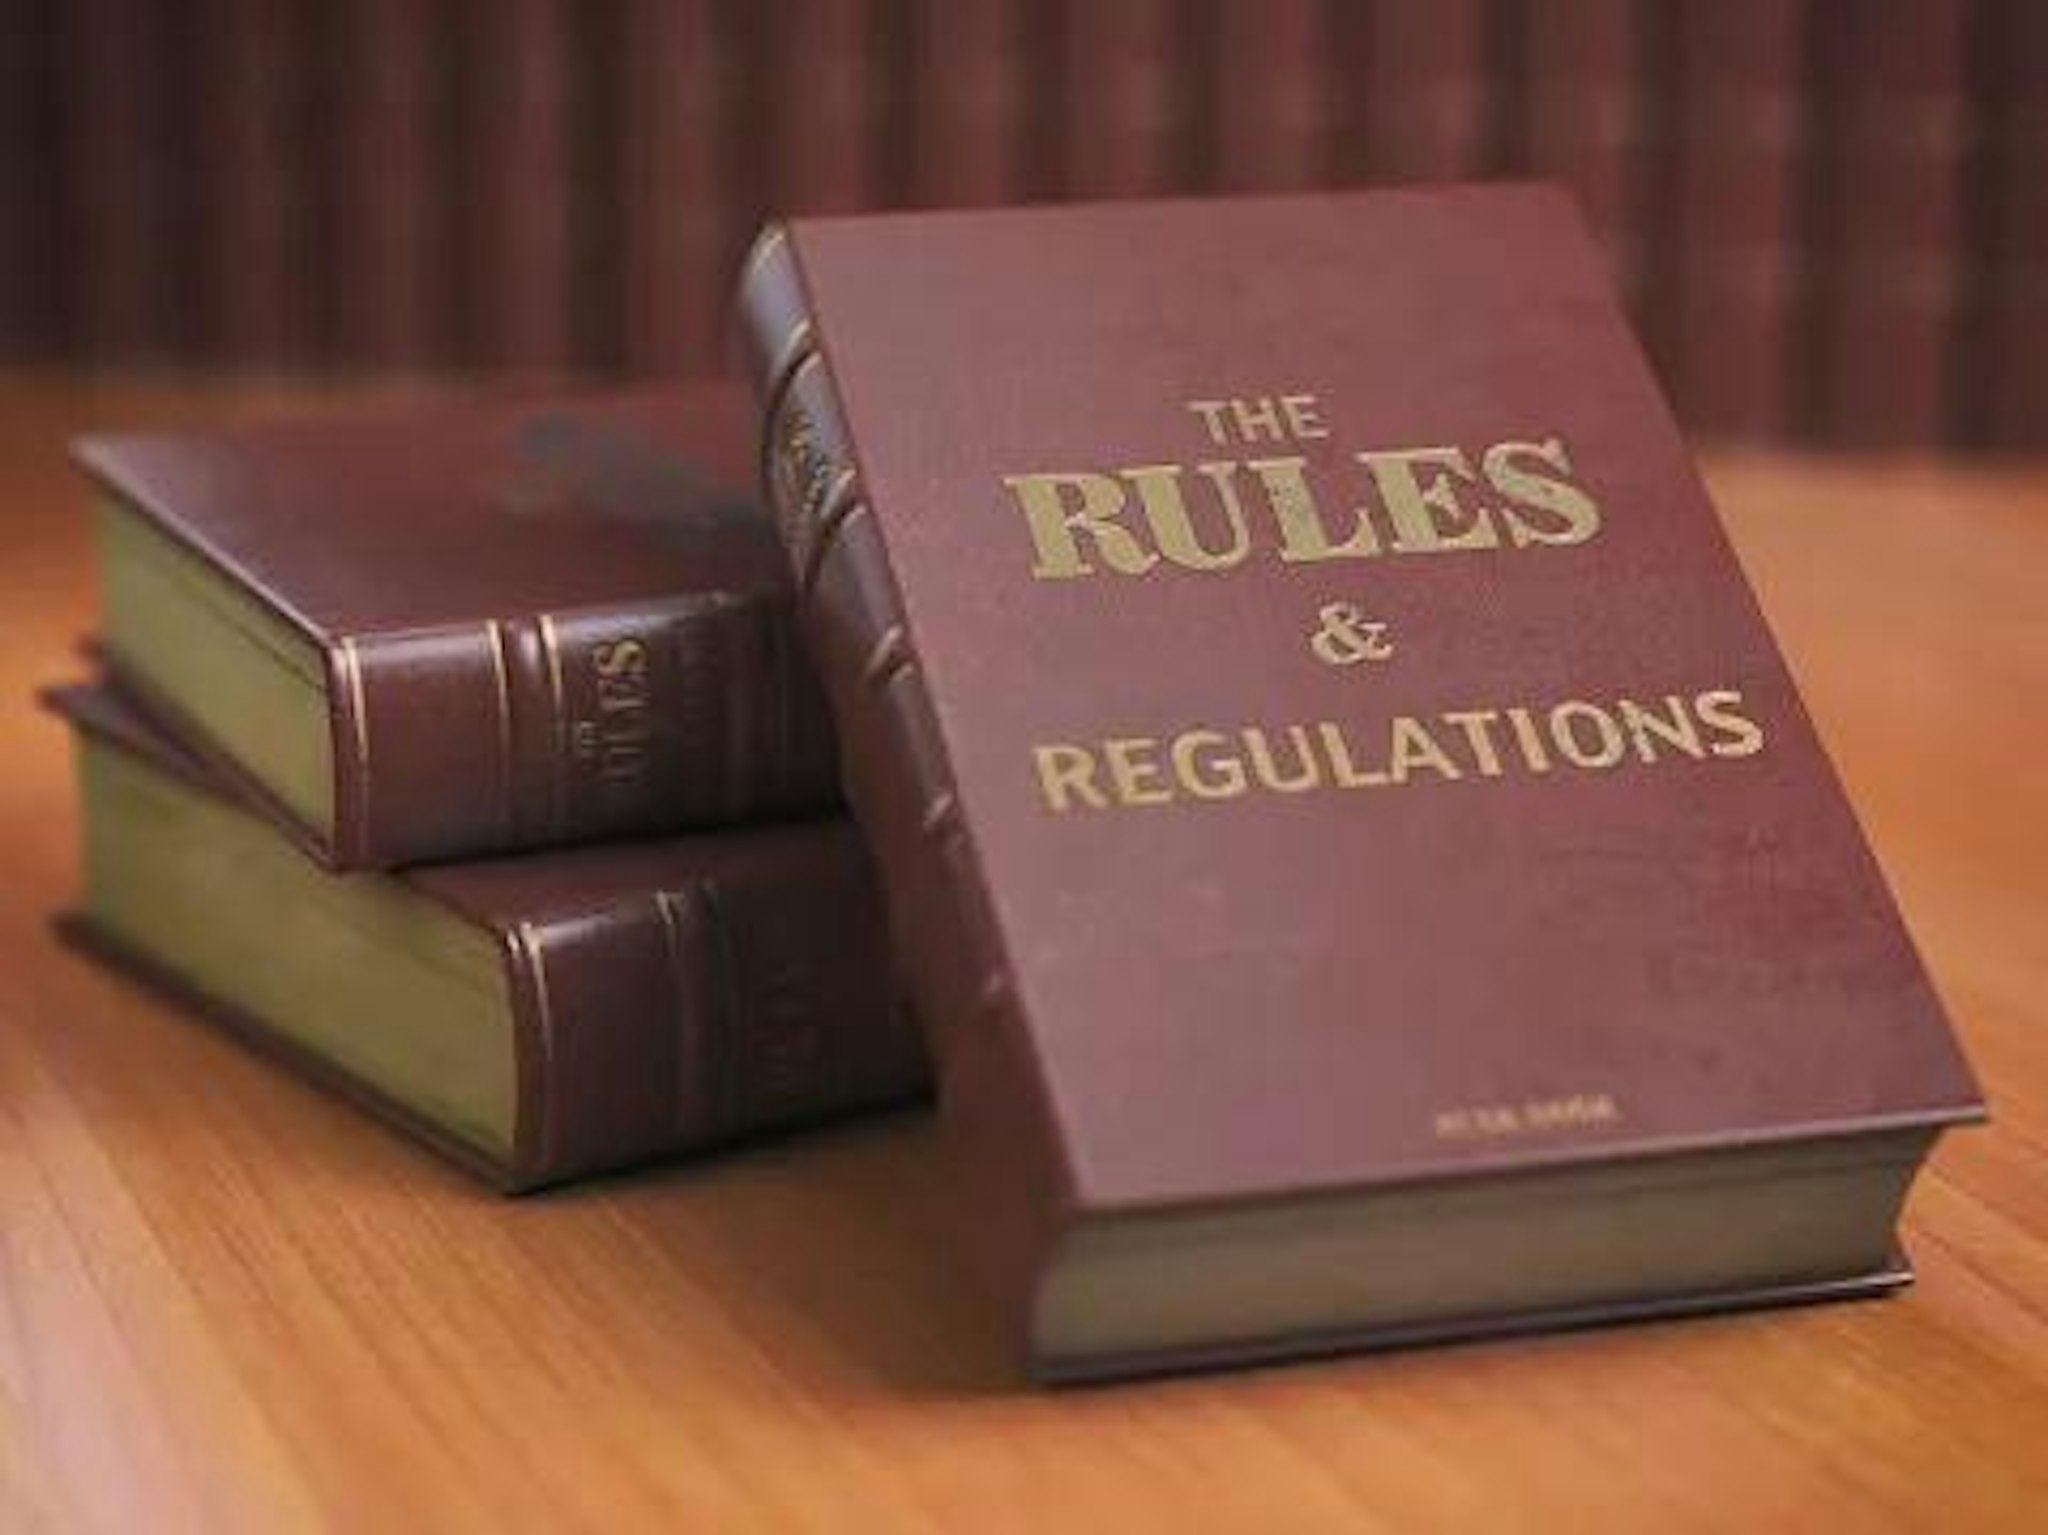 Book with text saying "rules and regulations"